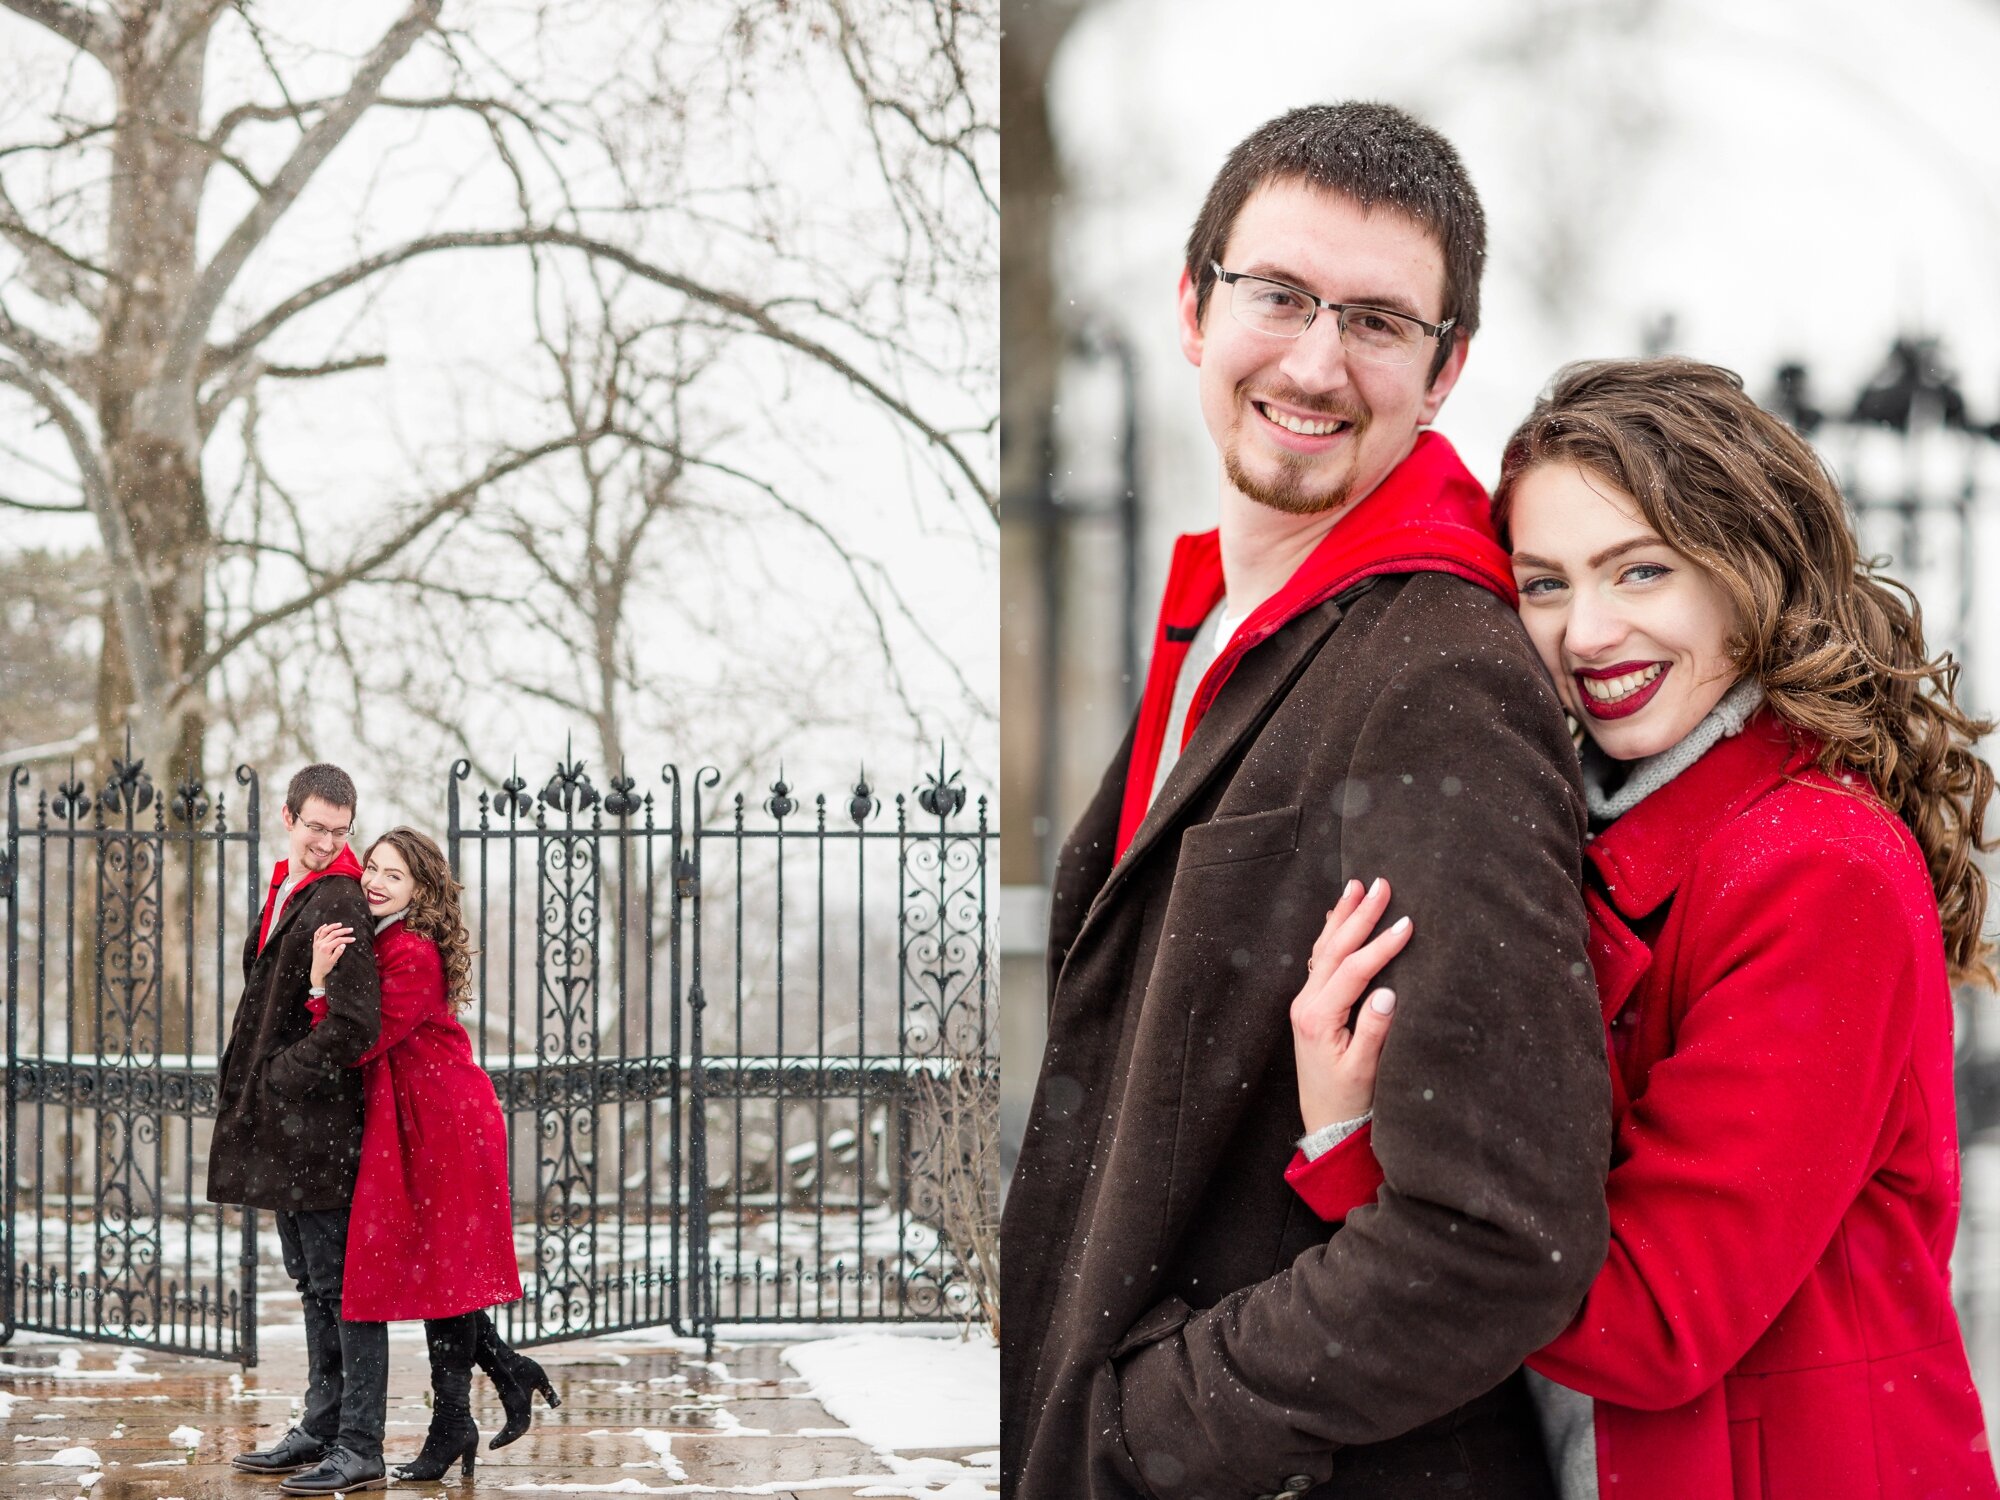 pittsburgh wedding photographer, winter photoshoot outfit ideas, what to wear for a winter photoshoot, winter engagement photos, winter engagement photos snow, mellon park engagement photos